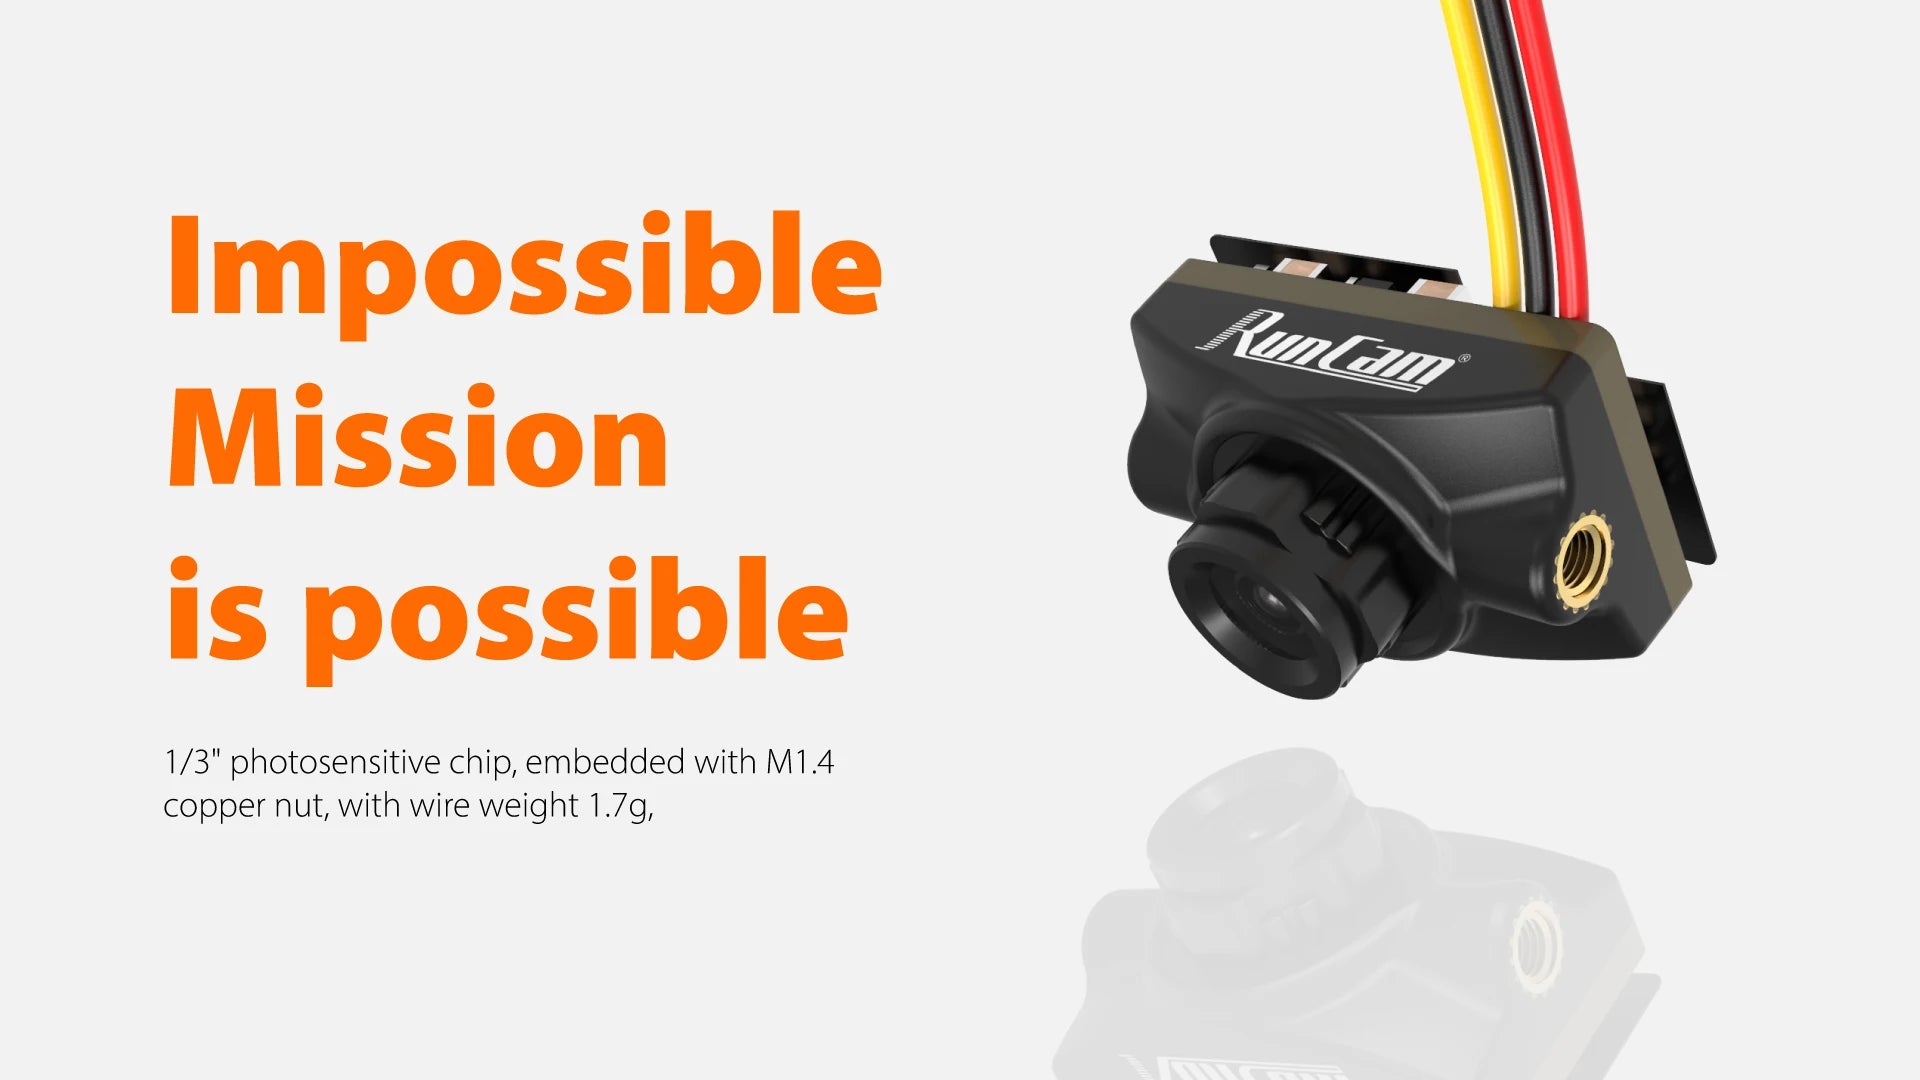 RunCam ATOM-W Analog Camera, Impossible Mission is possible 1/3" photosensitive embedded with M1.4 copper nut;